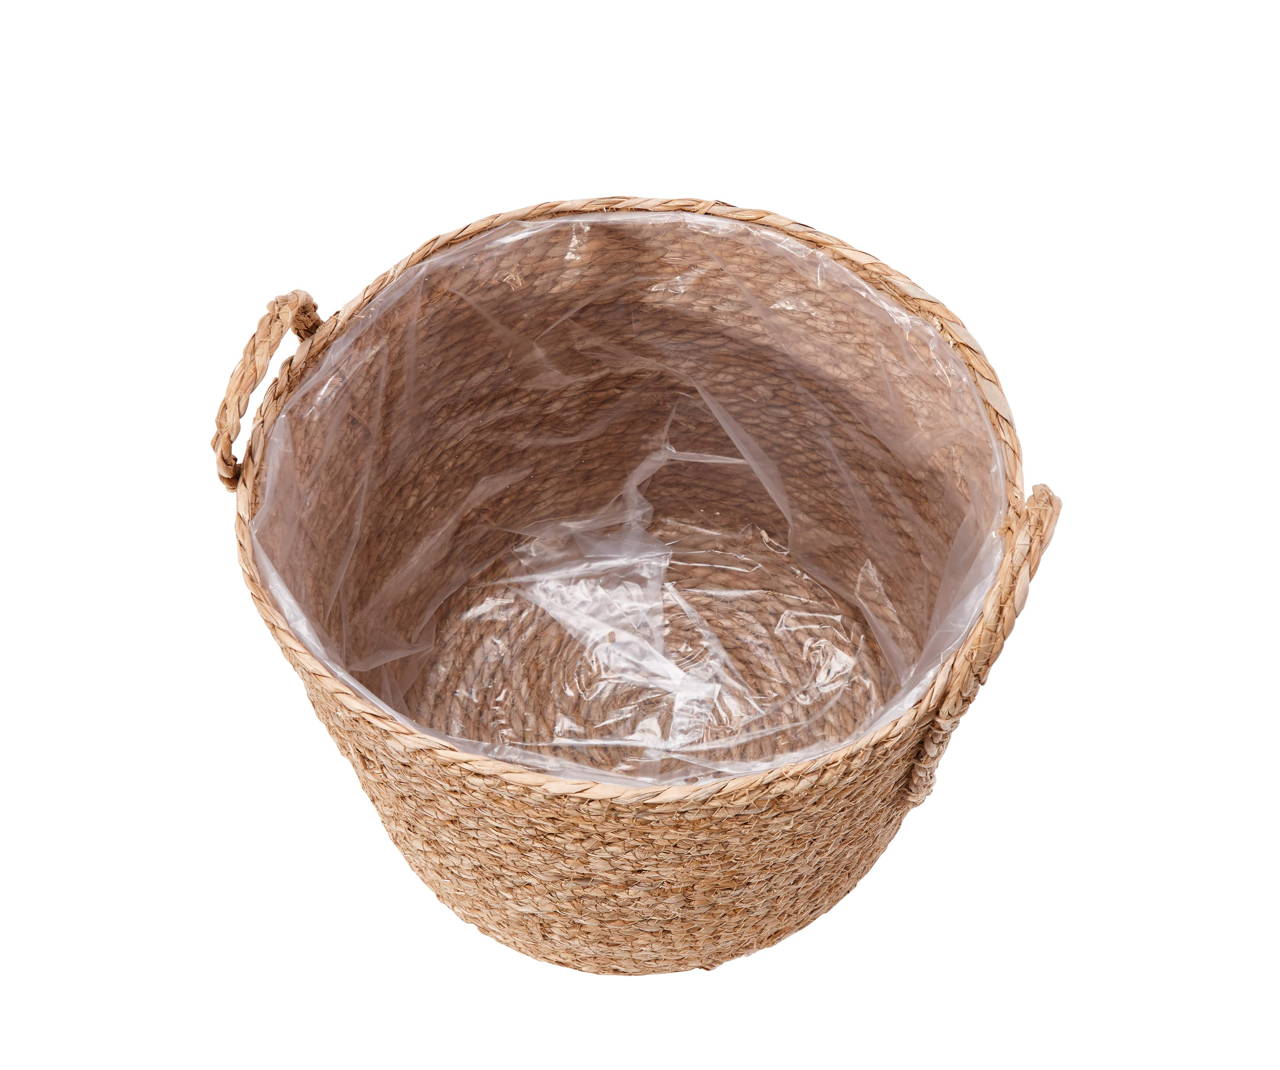 Wicker Basket with Water Bag